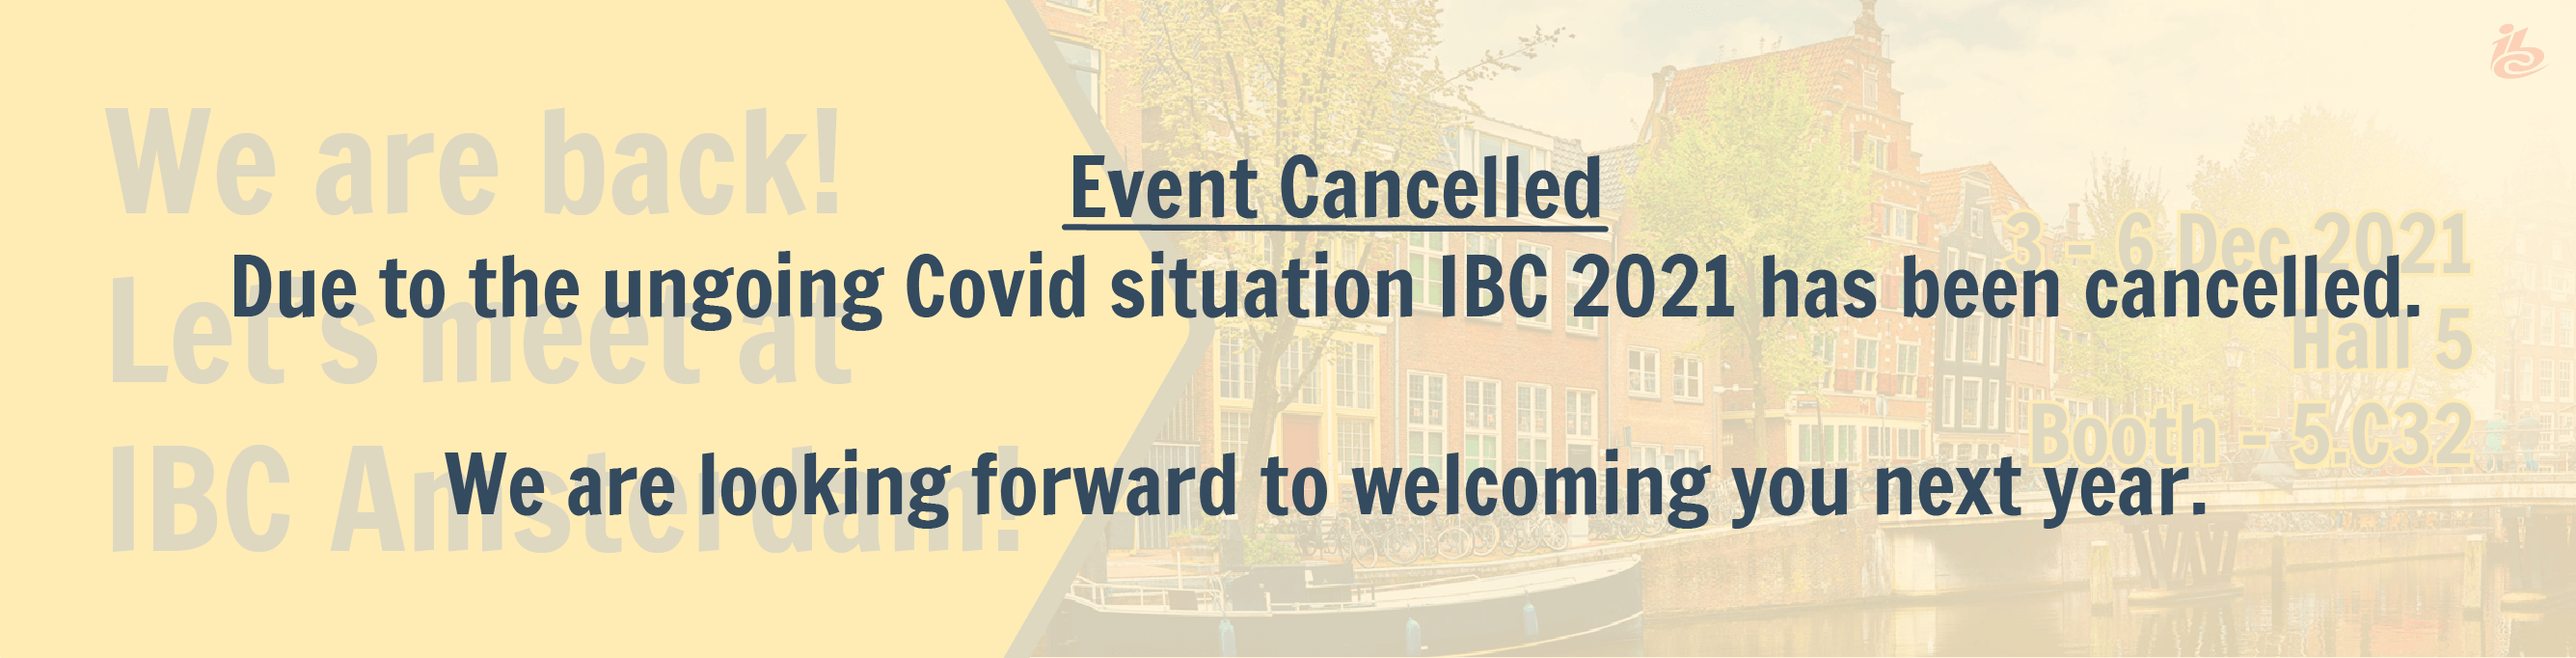 THEOplayer_Event_IBC-2021_Cancelled